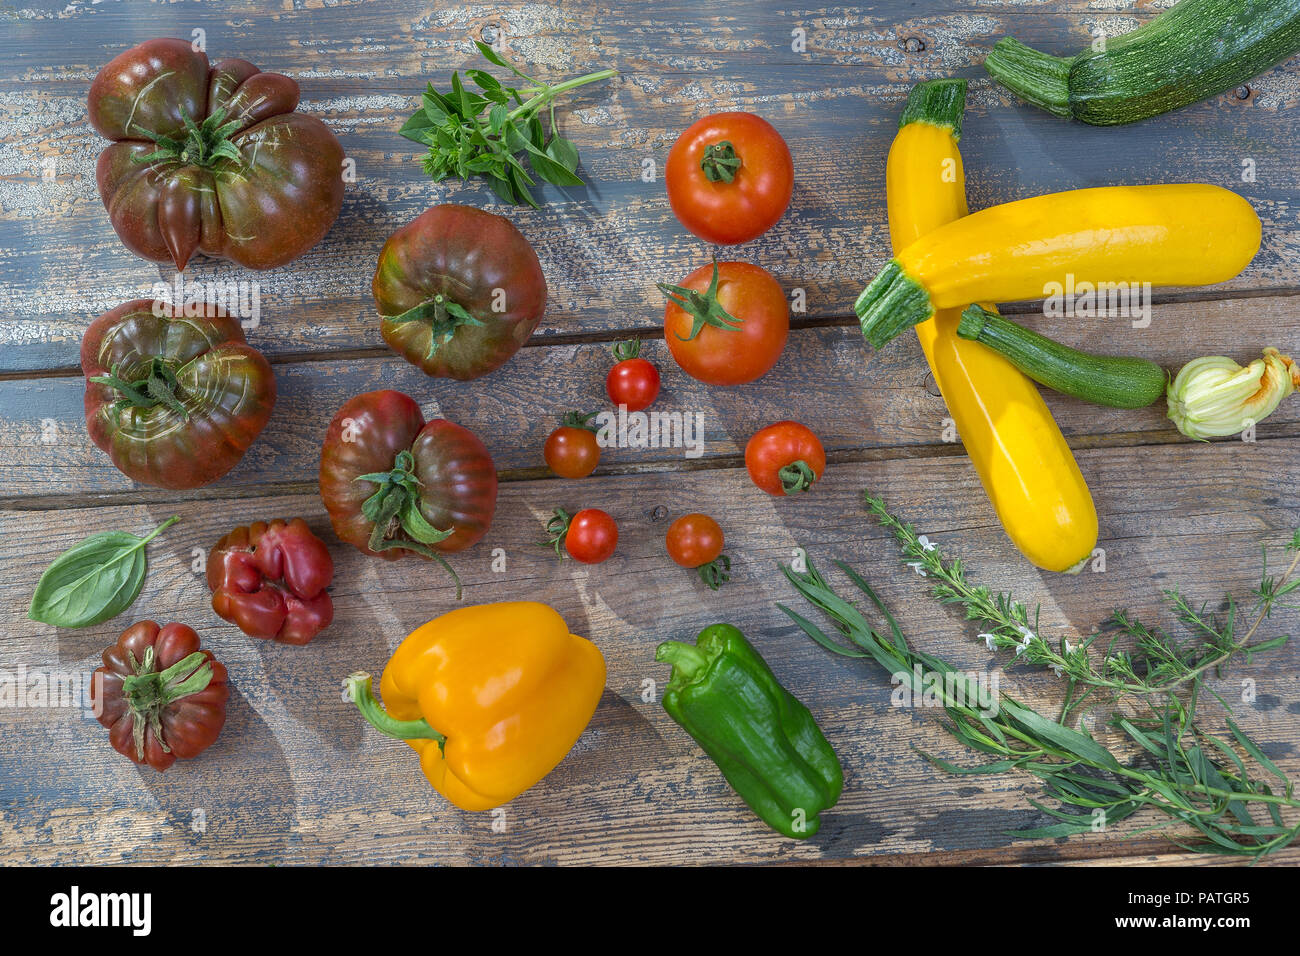 Group of Tomatoes, ancient varieties of various tomatoes on wooden boarc over a old painted wall background Stock Photo